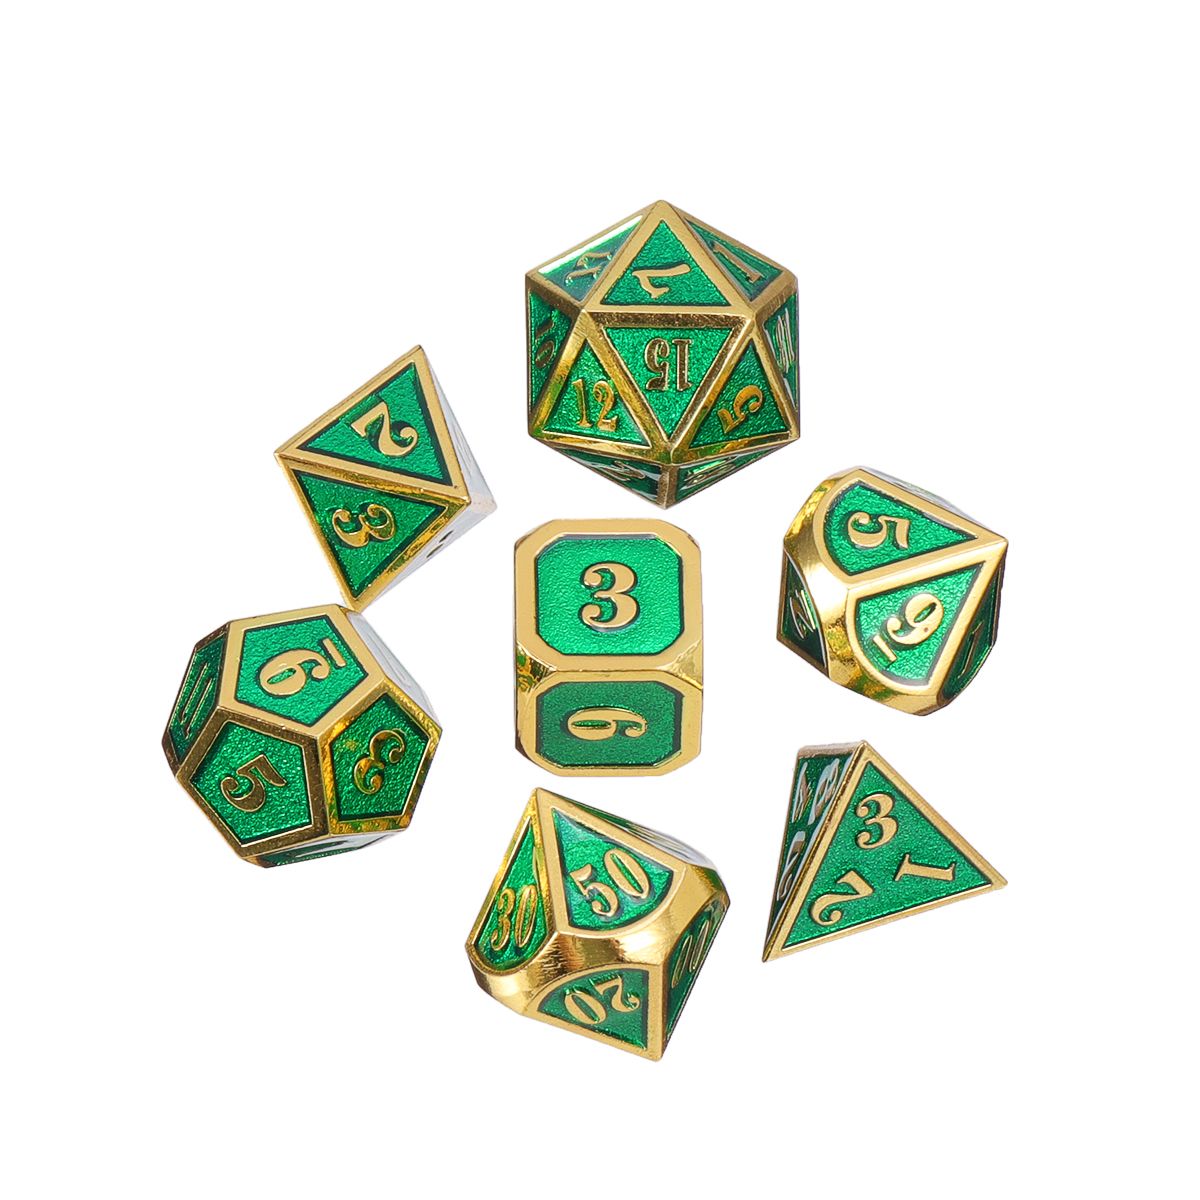 7Pcs-Heavy-Duty-Metal-Polyhedral-Dices-Set-Multisided-Dice-Antique-RPG-Role-Playing-Game-Dices-1371263